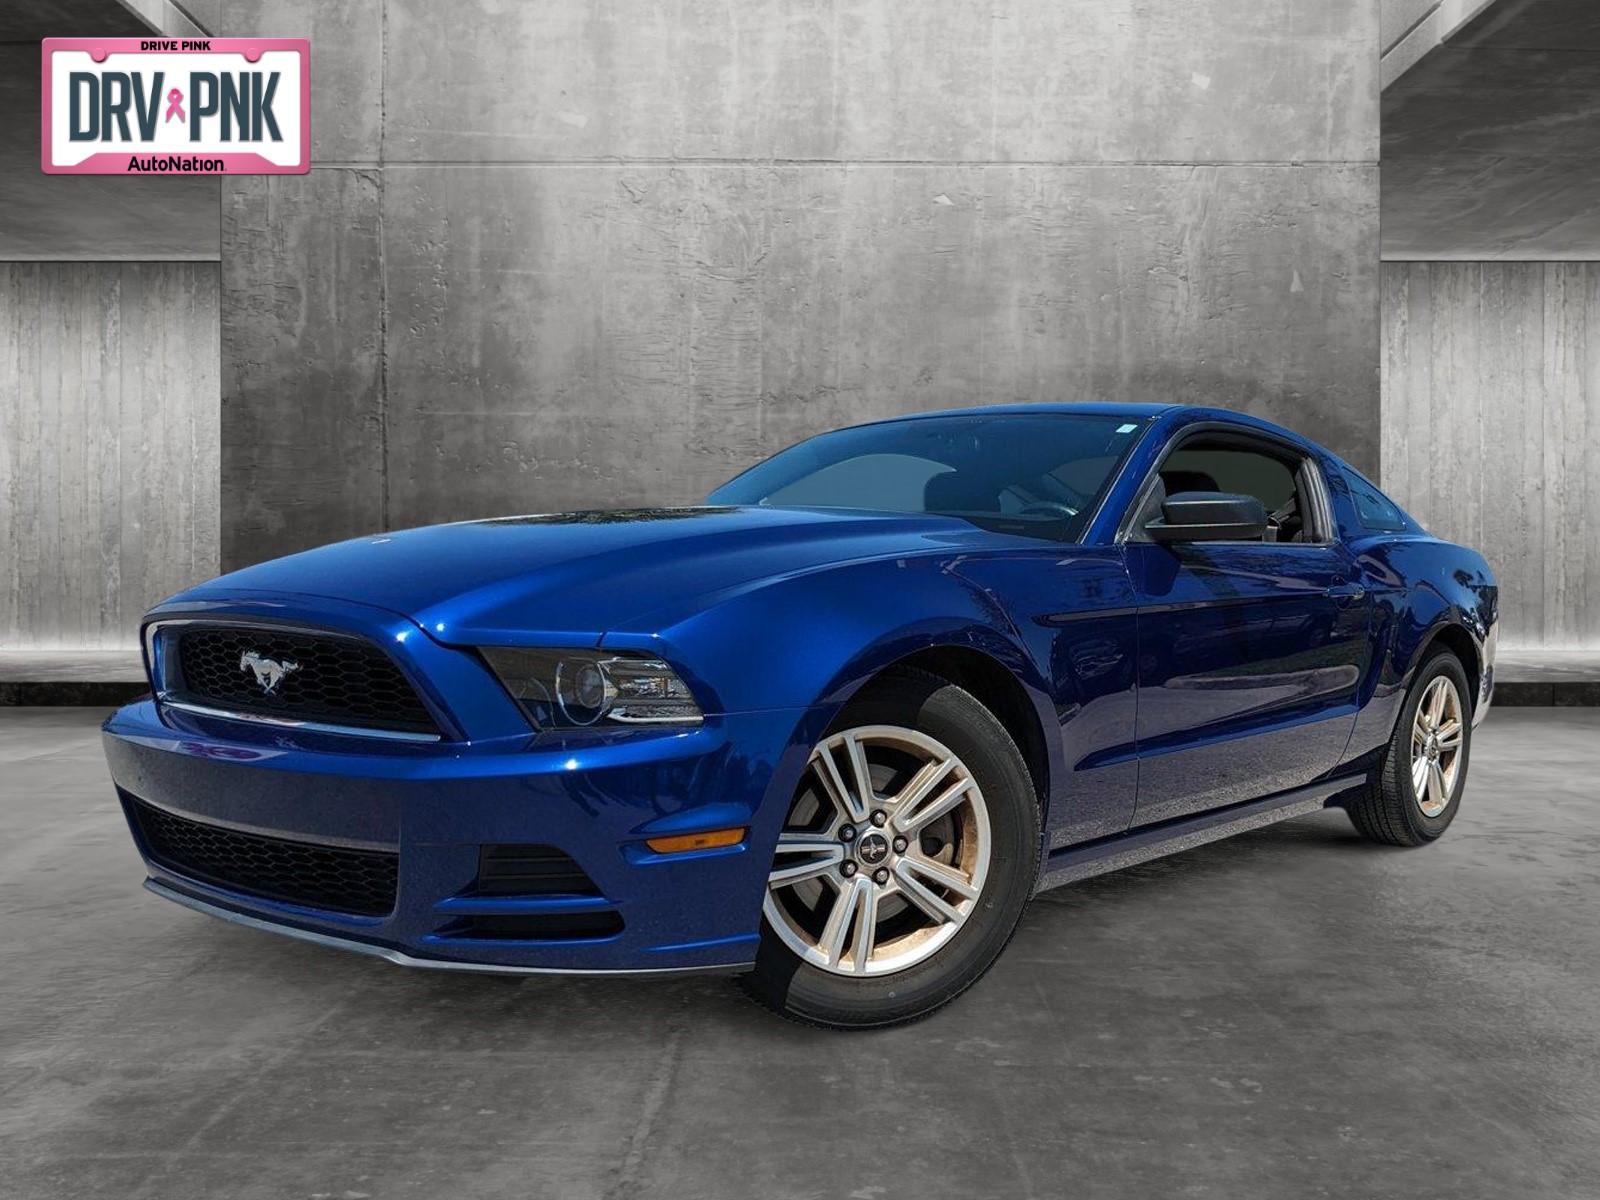 2013 Ford Mustang Vehicle Photo in Winter Park, FL 32792